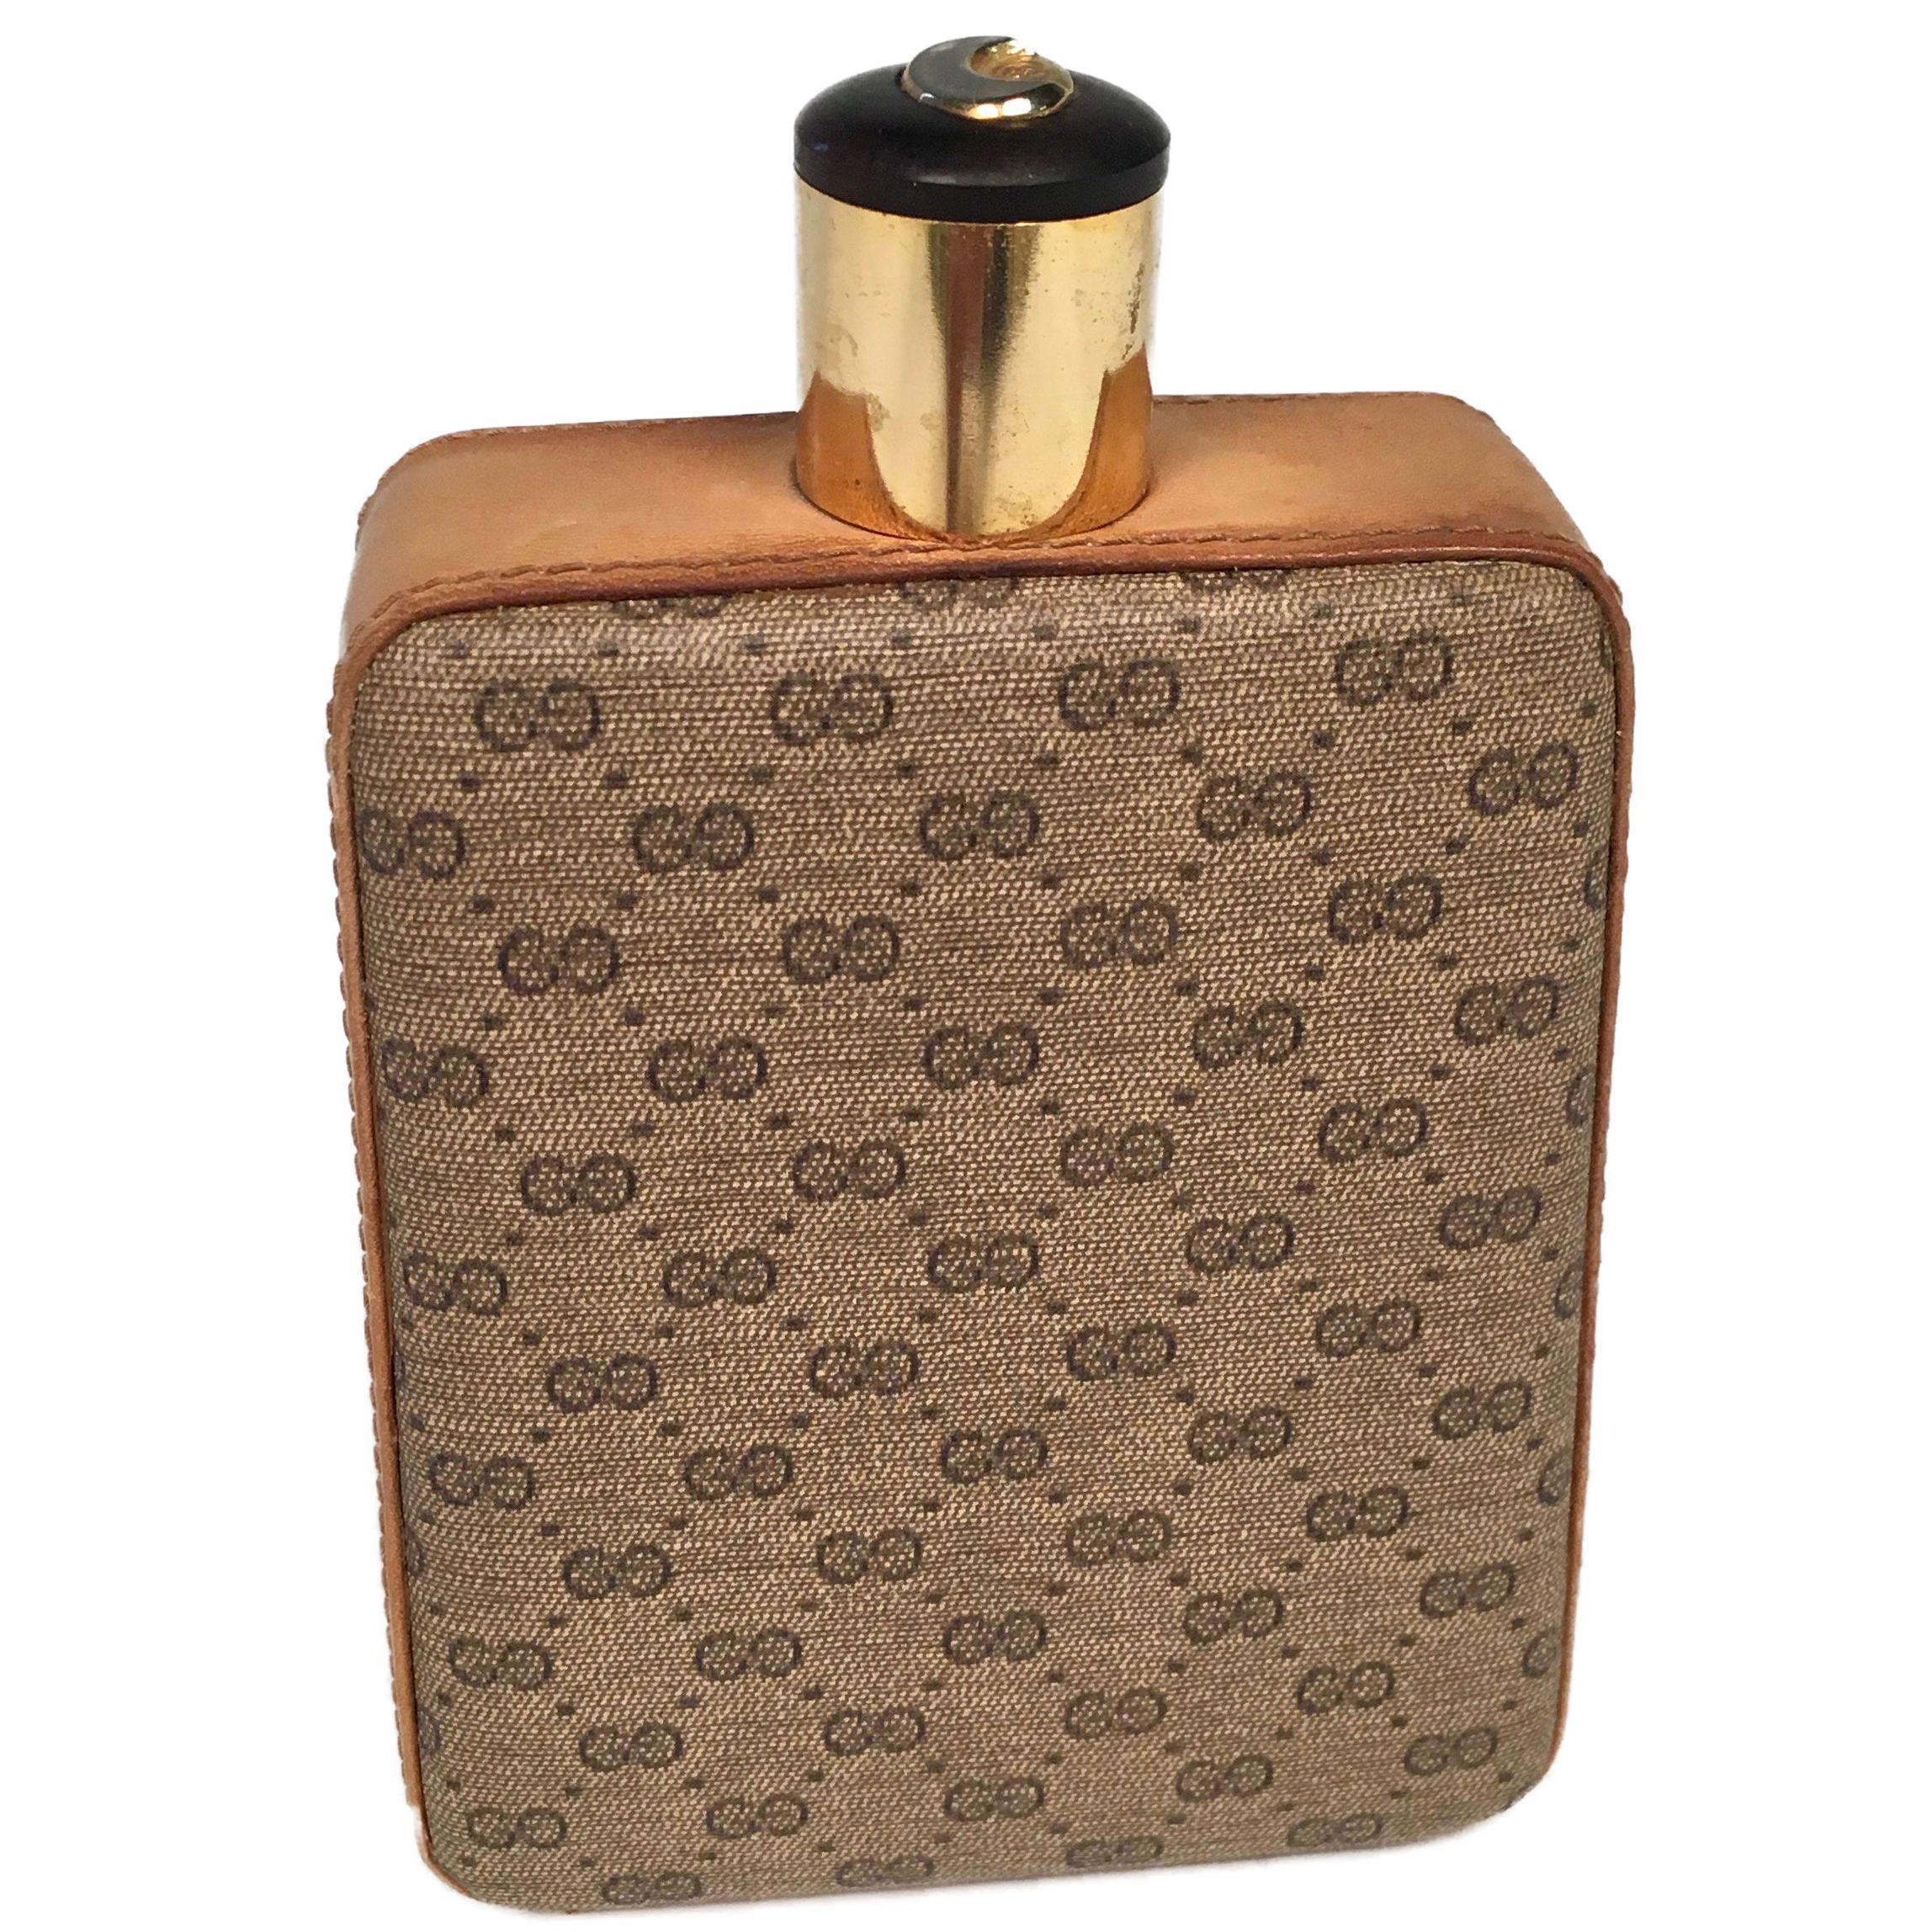 Gucci Light Brown Leather Thermos Flask, Italy, 1970s